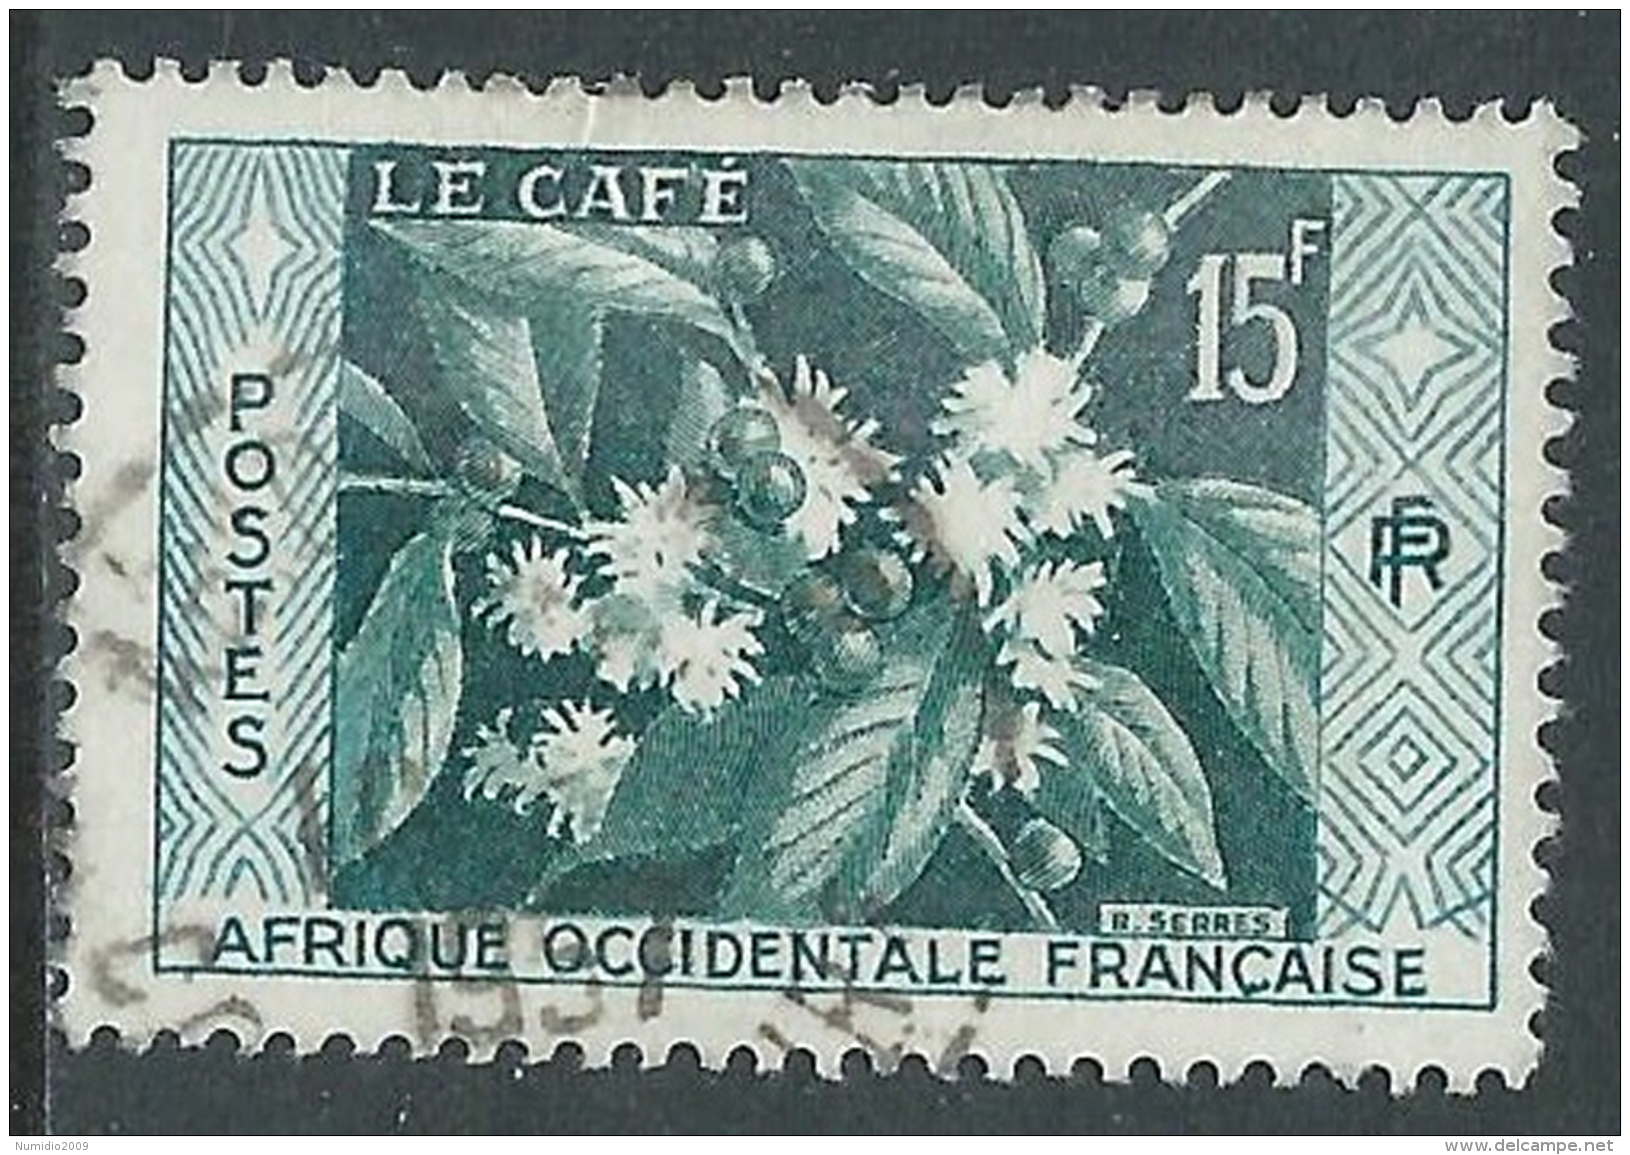 1956 AFRICA OCCIDENTALE FRANCESE USATO CAFFE - R39-7 - Used Stamps